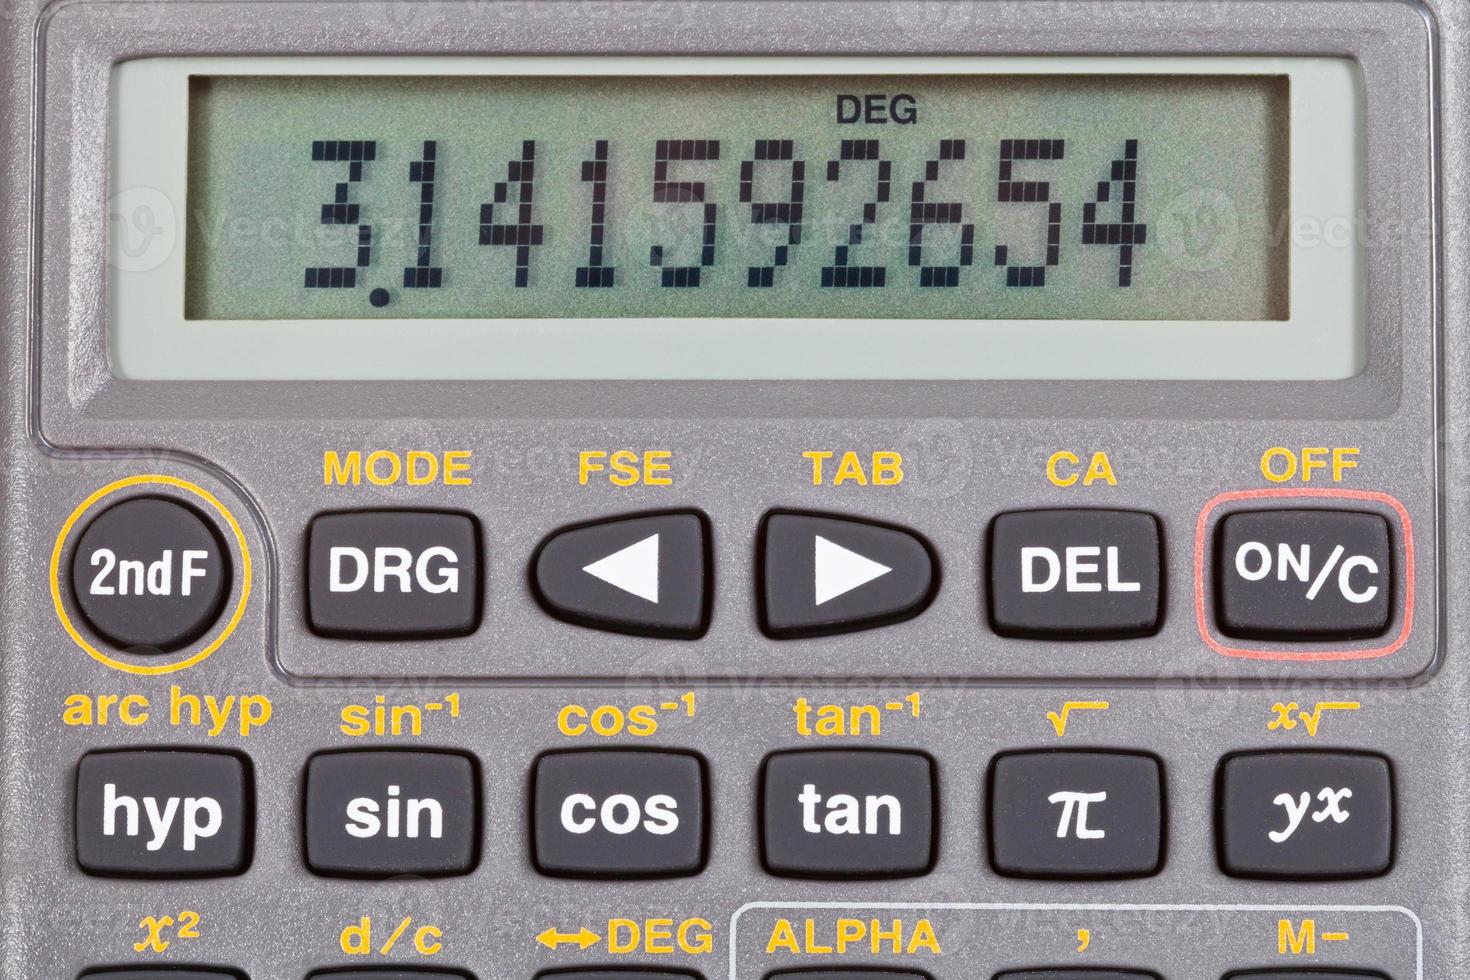 display of scientific calculator with mathematical functions photo